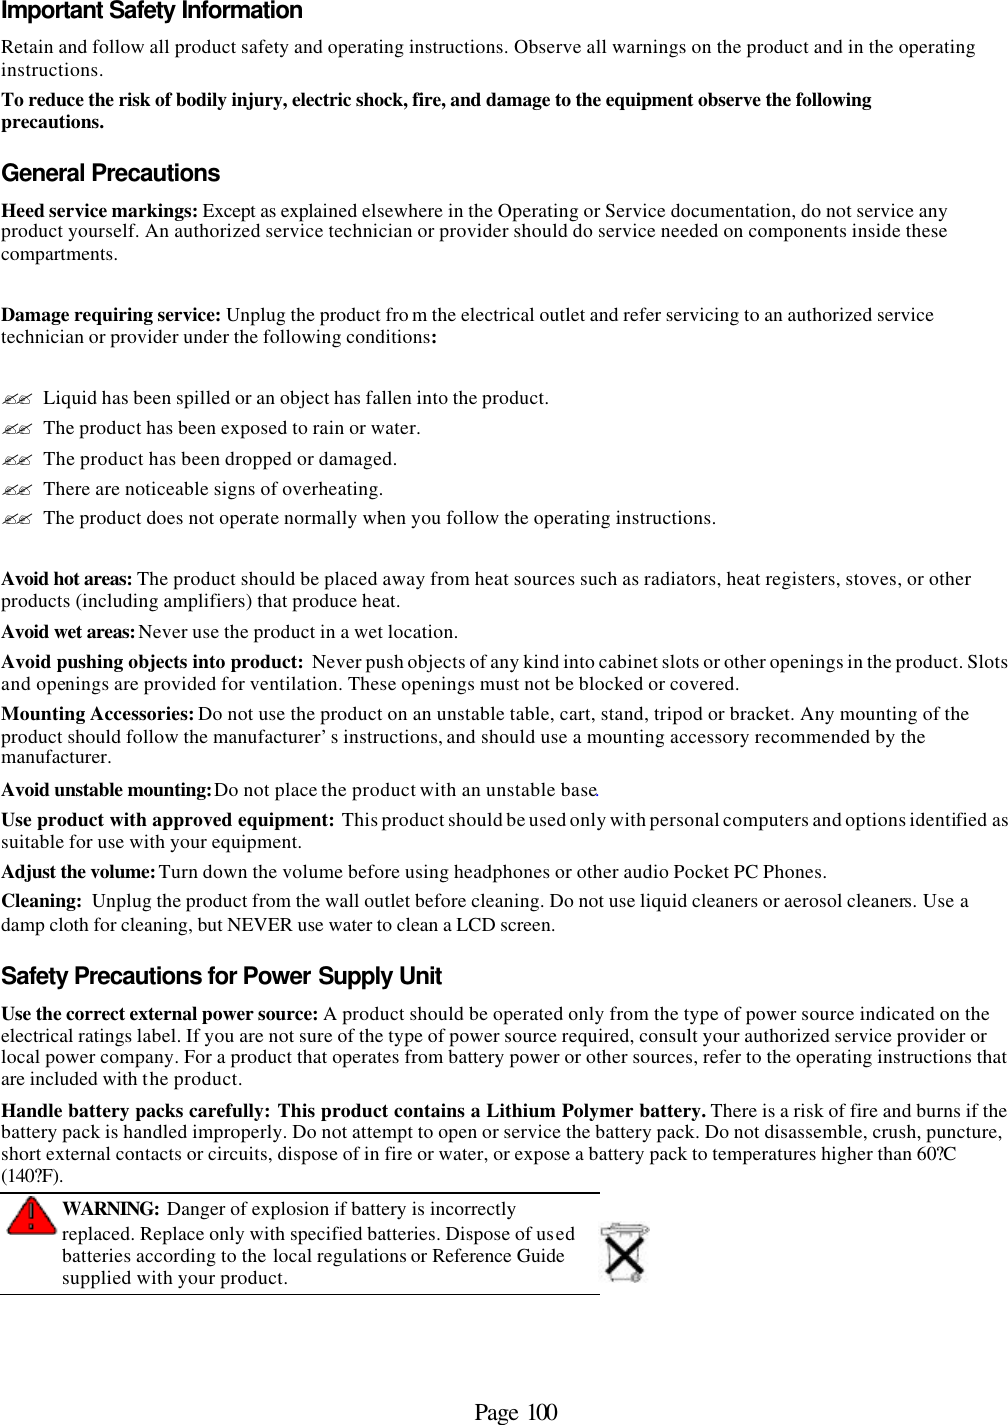 Page 100 Important Safety Information Retain and follow all product safety and operating instructions. Observe all warnings on the product and in the operating instructions. To reduce the risk of bodily injury, electric shock, fire, and damage to the equipment observe the following precautions. General Precautions Heed service markings: Except as explained elsewhere in the Operating or Service documentation, do not service any product yourself. An authorized service technician or provider should do service needed on components inside these compartments.  Damage requiring service: Unplug the product fro m the electrical outlet and refer servicing to an authorized service technician or provider under the following conditions:  ?? Liquid has been spilled or an object has fallen into the product. ?? The product has been exposed to rain or water. ?? The product has been dropped or damaged. ?? There are noticeable signs of overheating. ?? The product does not operate normally when you follow the operating instructions.  Avoid hot areas: The product should be placed away from heat sources such as radiators, heat registers, stoves, or other products (including amplifiers) that produce heat. Avoid wet areas: Never use the product in a wet location. Avoid pushing objects into product: Never push objects of any kind into cabinet slots or other openings in the product. Slots and openings are provided for ventilation. These openings must not be blocked or covered. Mounting Accessories: Do not use the product on an unstable table, cart, stand, tripod or bracket. Any mounting of the product should follow the manufacturer’s instructions, and should use a mounting accessory recommended by the manufacturer. Avoid unstable mounting: Do not place the product with an unstable base.  Use product with approved equipment: This product should be used only with personal computers and options identified as suitable for use with your equipment. Adjust the volume: Turn down the volume before using headphones or other audio Pocket PC Phones. Cleaning:  Unplug the product from the wall outlet before cleaning. Do not use liquid cleaners or aerosol cleaners. Use a damp cloth for cleaning, but NEVER use water to clean a LCD screen. Safety Precautions for Power Supply Unit Use the correct external power source: A product should be operated only from the type of power source indicated on the electrical ratings label. If you are not sure of the type of power source required, consult your authorized service provider or local power company. For a product that operates from battery power or other sources, refer to the operating instructions that are included with the product. Handle battery packs carefully: This product contains a Lithium Polymer battery. There is a risk of fire and burns if the battery pack is handled improperly. Do not attempt to open or service the battery pack. Do not disassemble, crush, puncture, short external contacts or circuits, dispose of in fire or water, or expose a battery pack to temperatures higher than 60?C (140?F).  WARNING: Danger of explosion if battery is incorrectly replaced. Replace only with specified batteries. Dispose of used batteries according to the local regulations or Reference Guide supplied with your product.  